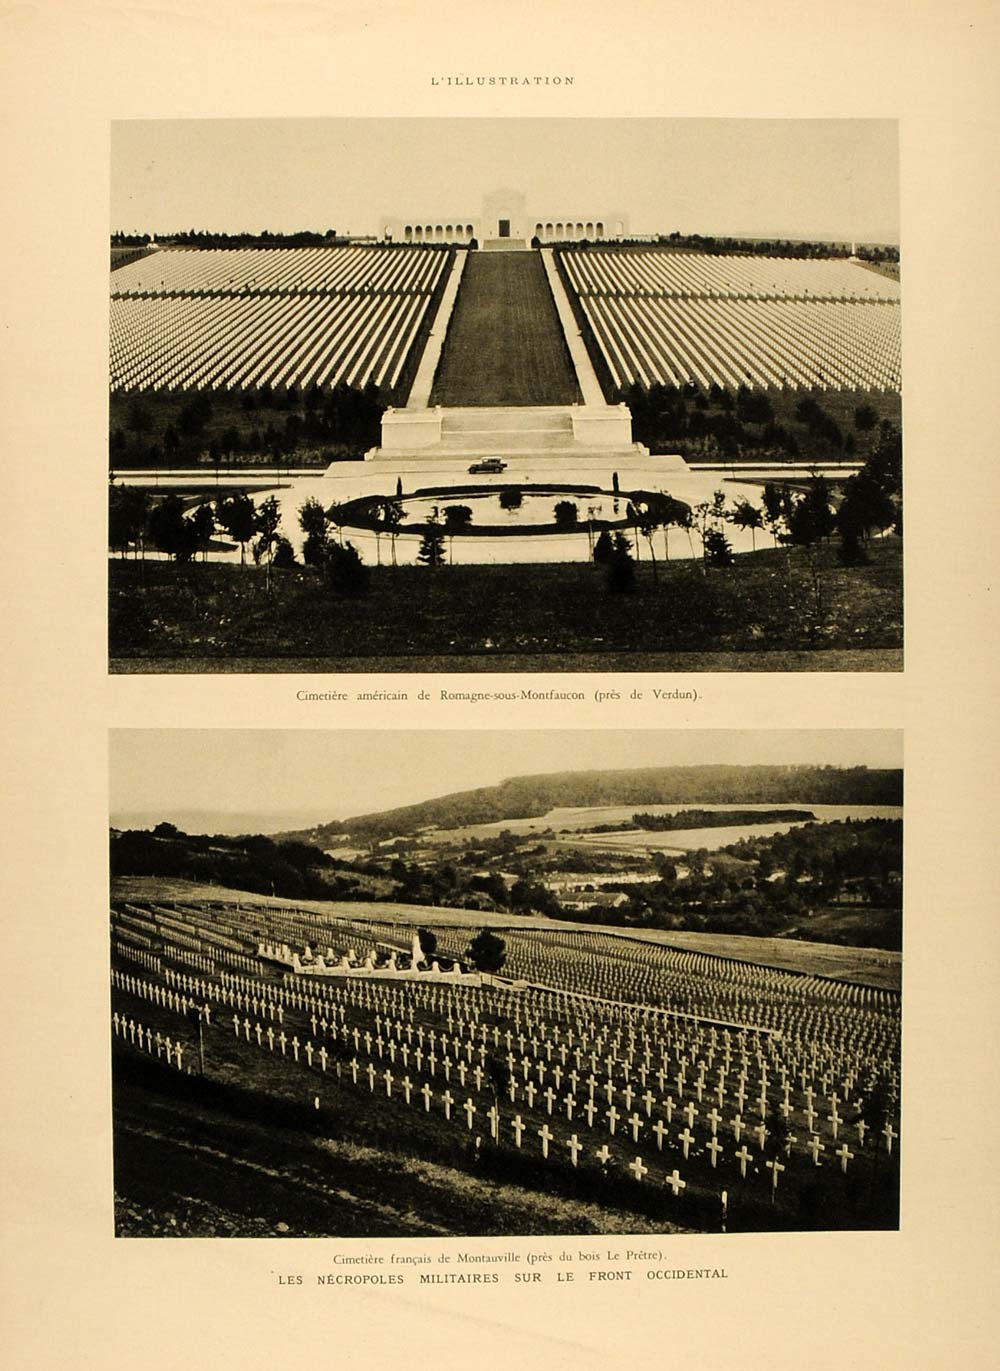 1934 WWI Cemetery French Belgian American France Print ORIGINAL HISTORIC ILL2